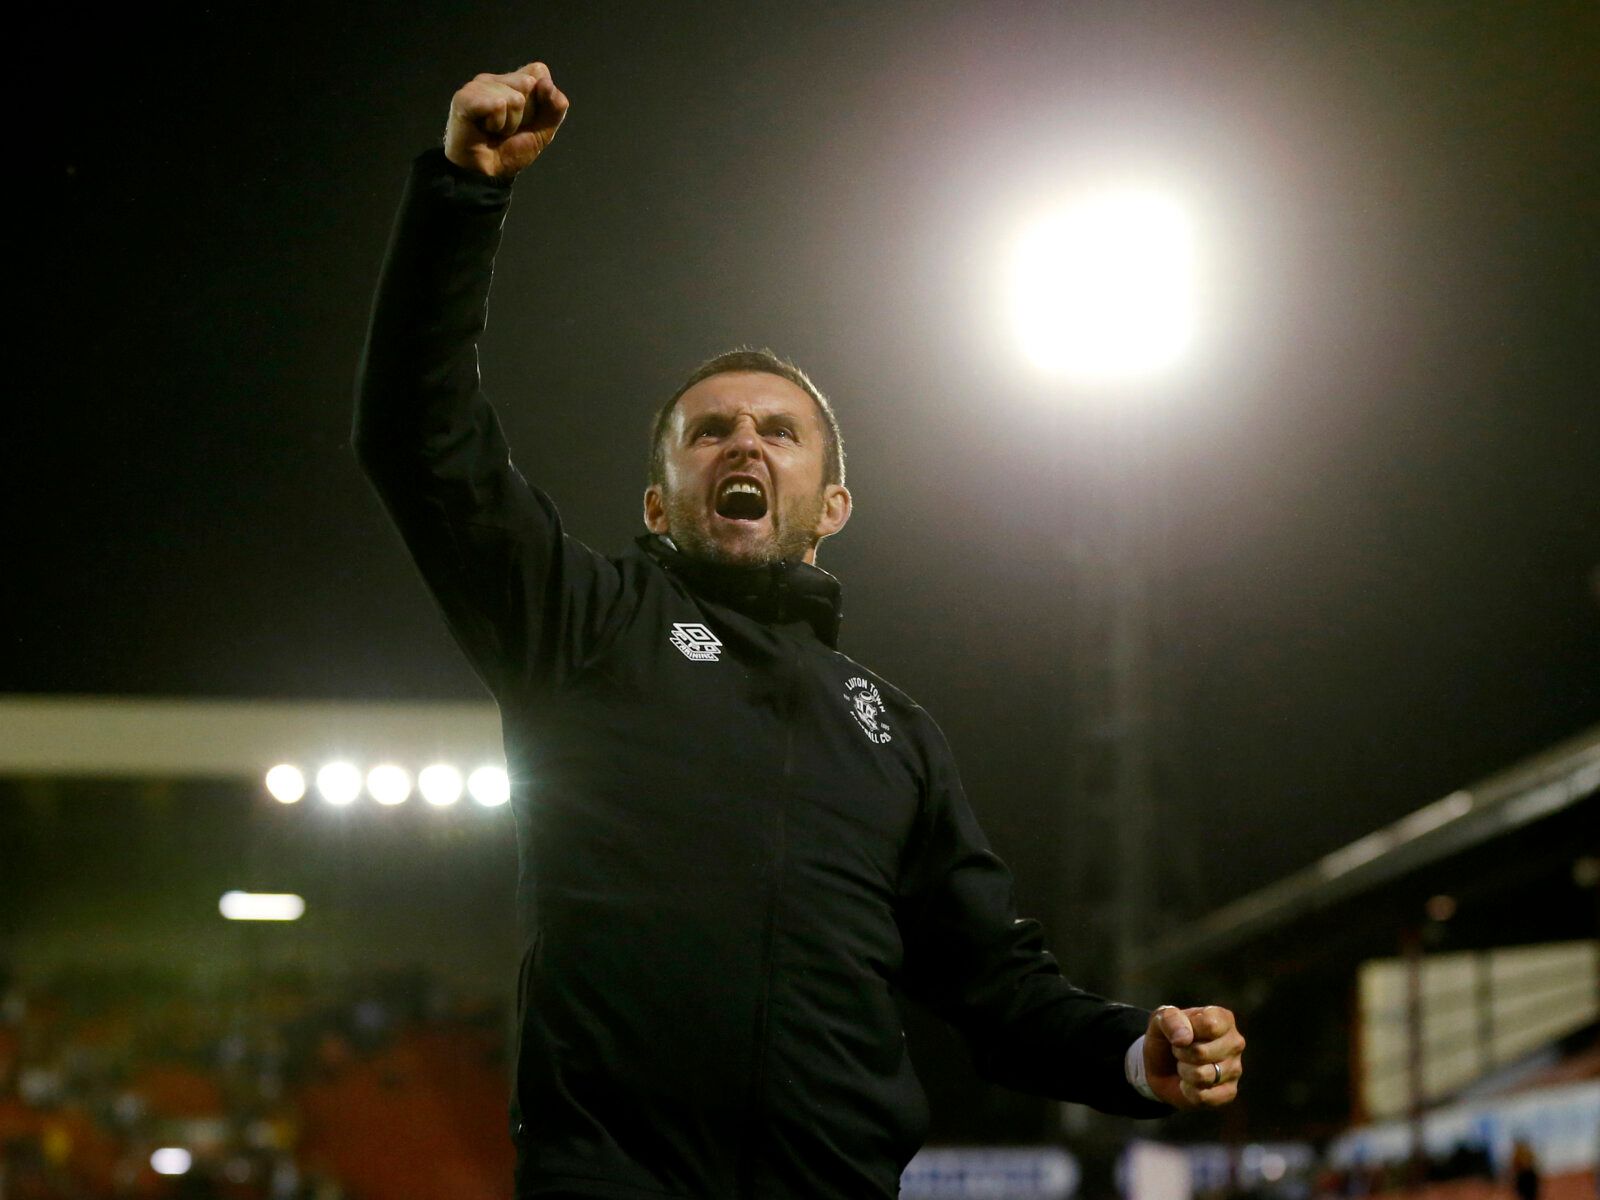 Soccer Football - Championship - Barnsley v Luton Town - Oakwell, Barnsley, Britain - August 17, 2021 Luton Town manager Nathan Jones celebrates after the match Action Images/Ed Sykes EDITORIAL USE ONLY. No use with unauthorized audio, video, data, fixture lists, club/league logos or 'live' services. Online in-match use limited to 75 images, no video emulation. No use in betting, games or single club /league/player publications.  Please contact your account representative for further details.